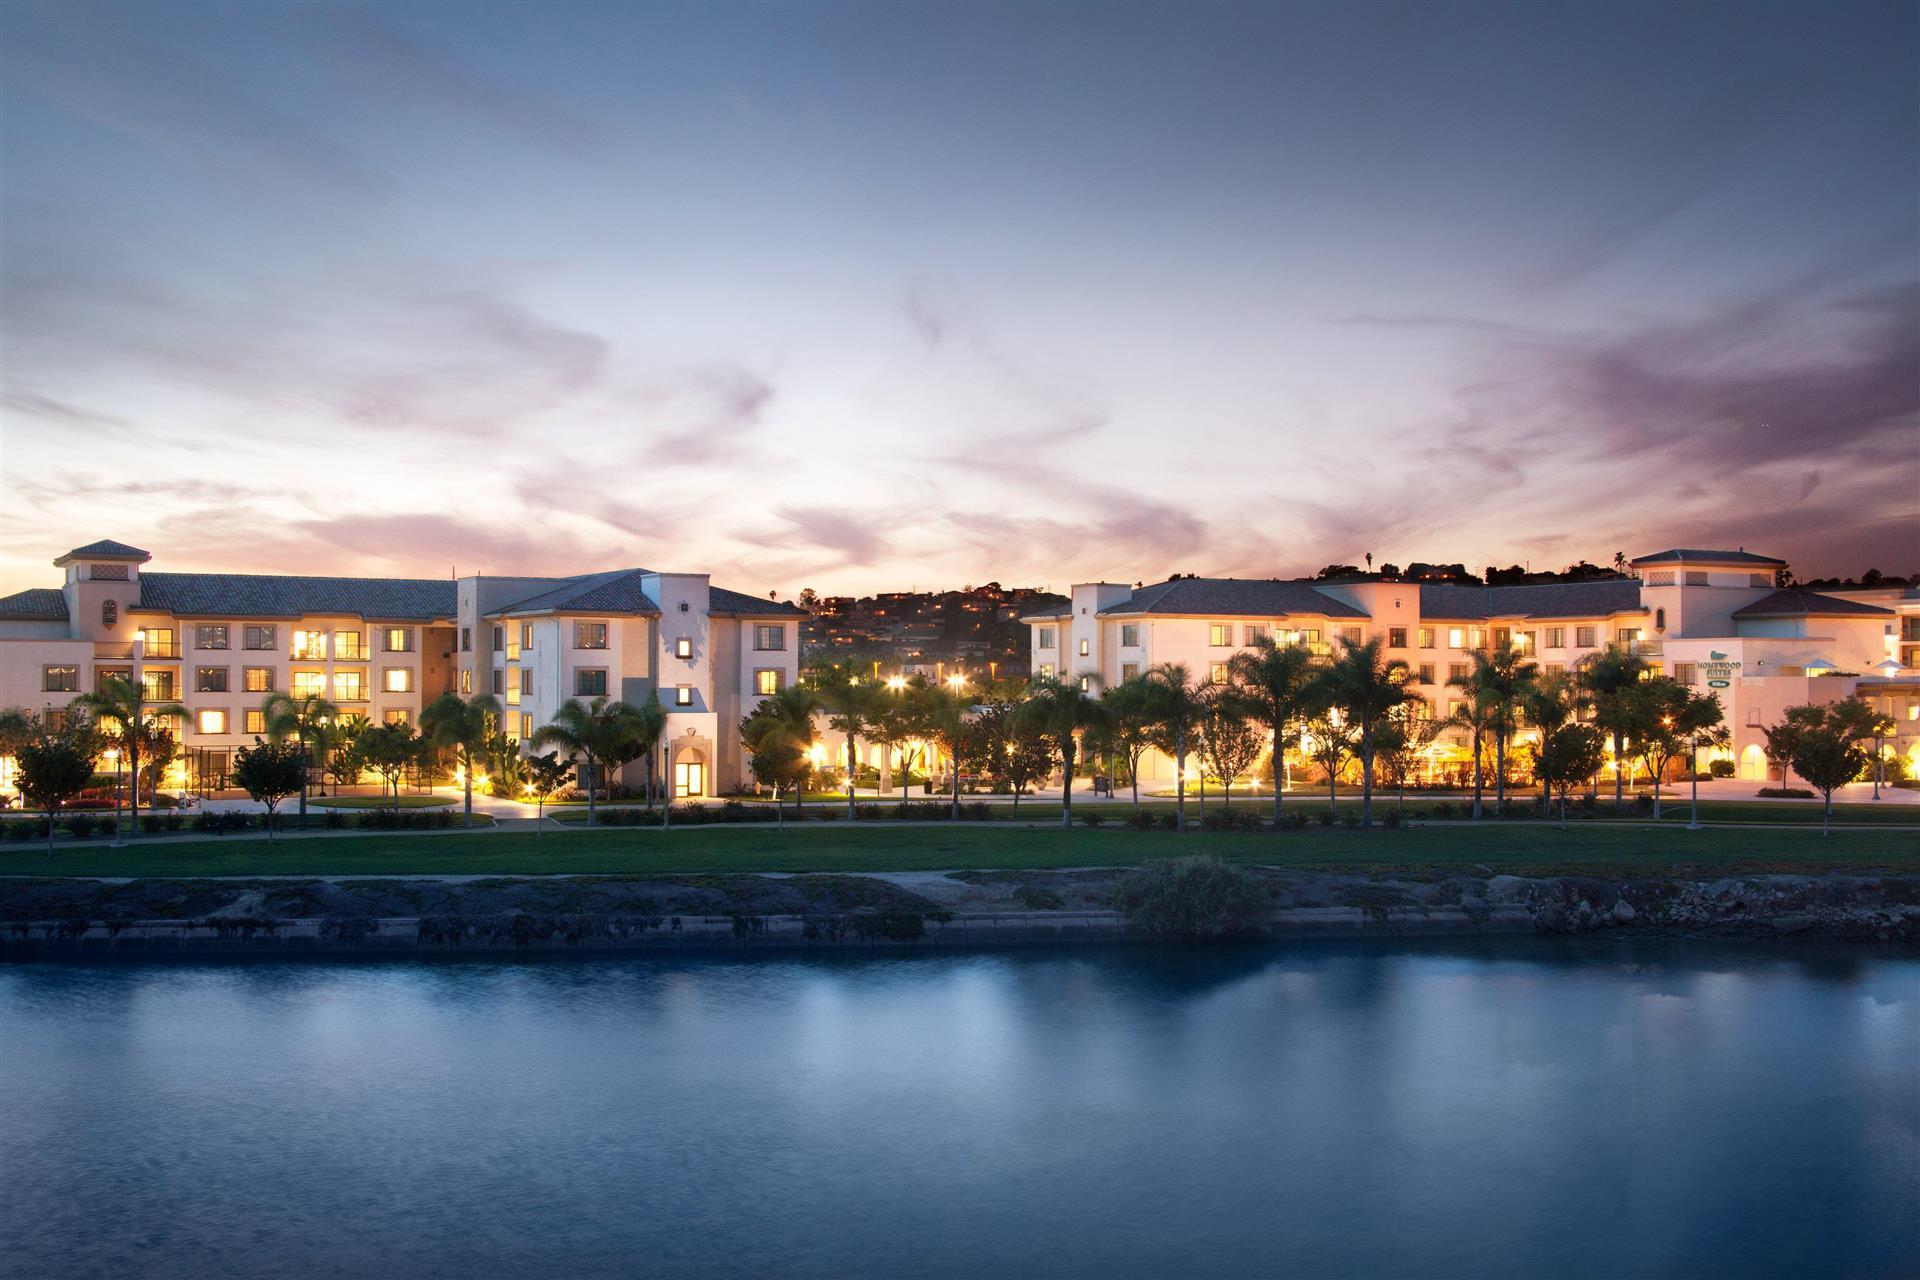 Homewood Suites by Hilton San Diego Airport-Liberty Station in San Diego, CA